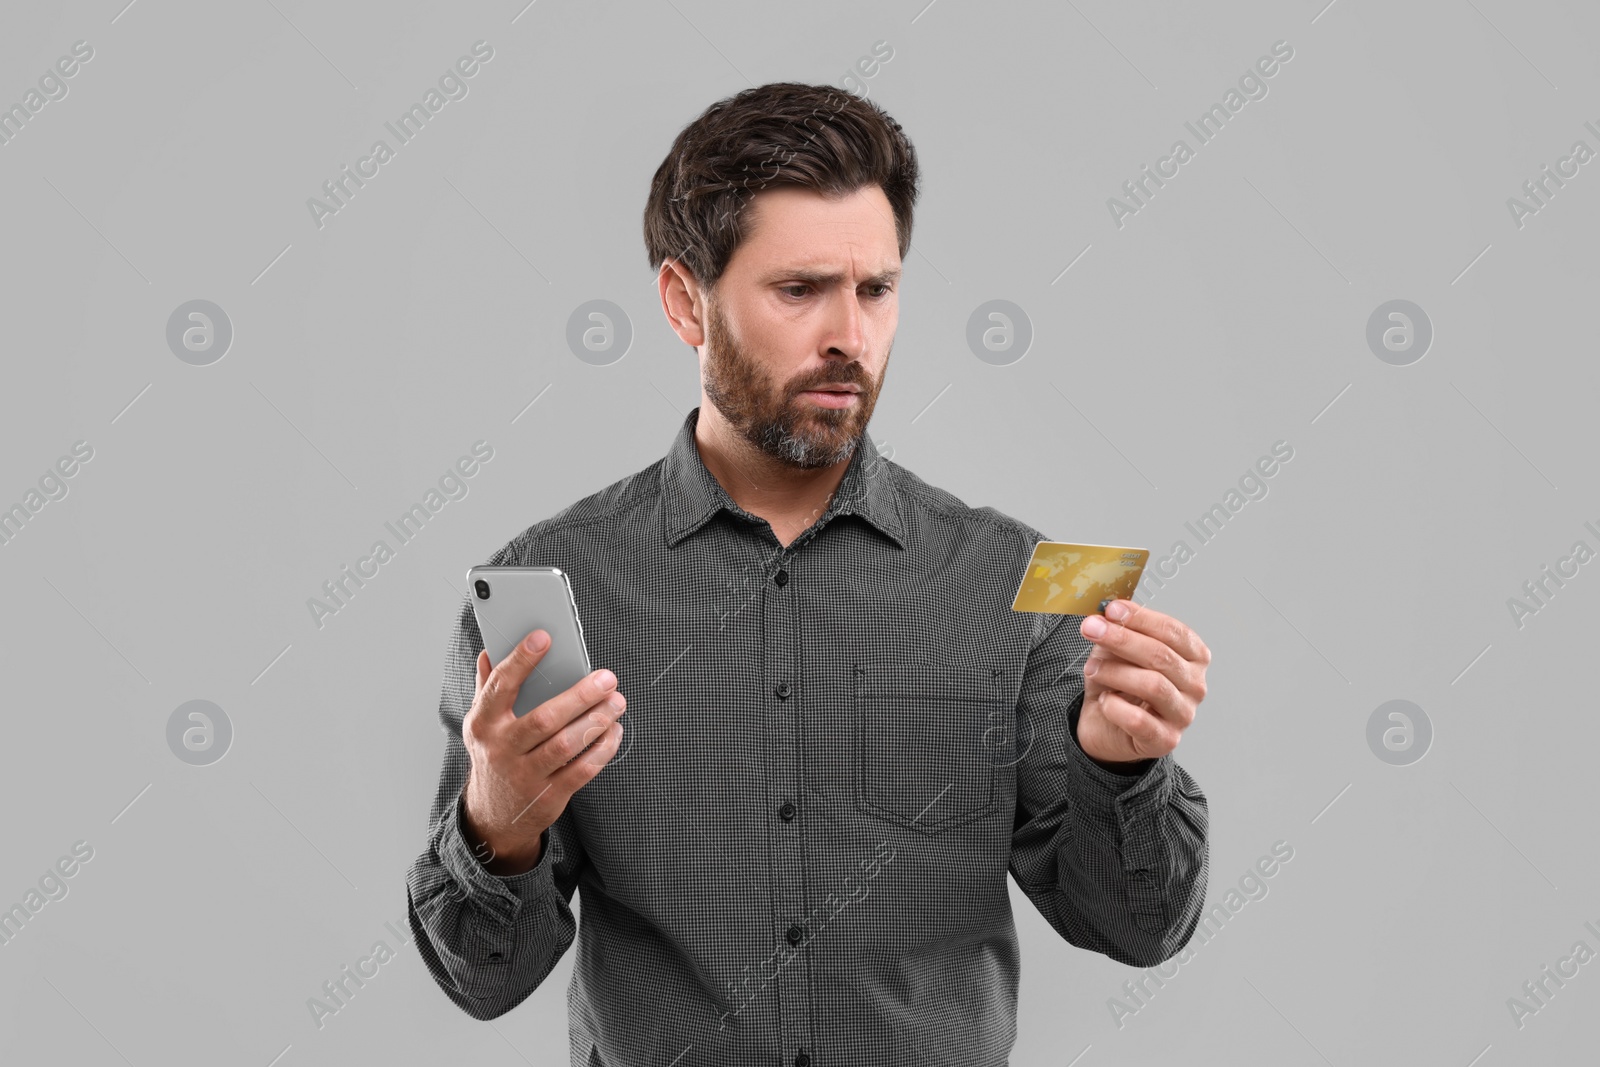 Photo of Emotional man holding smartphone and credit card on light grey background. Be careful - fraud